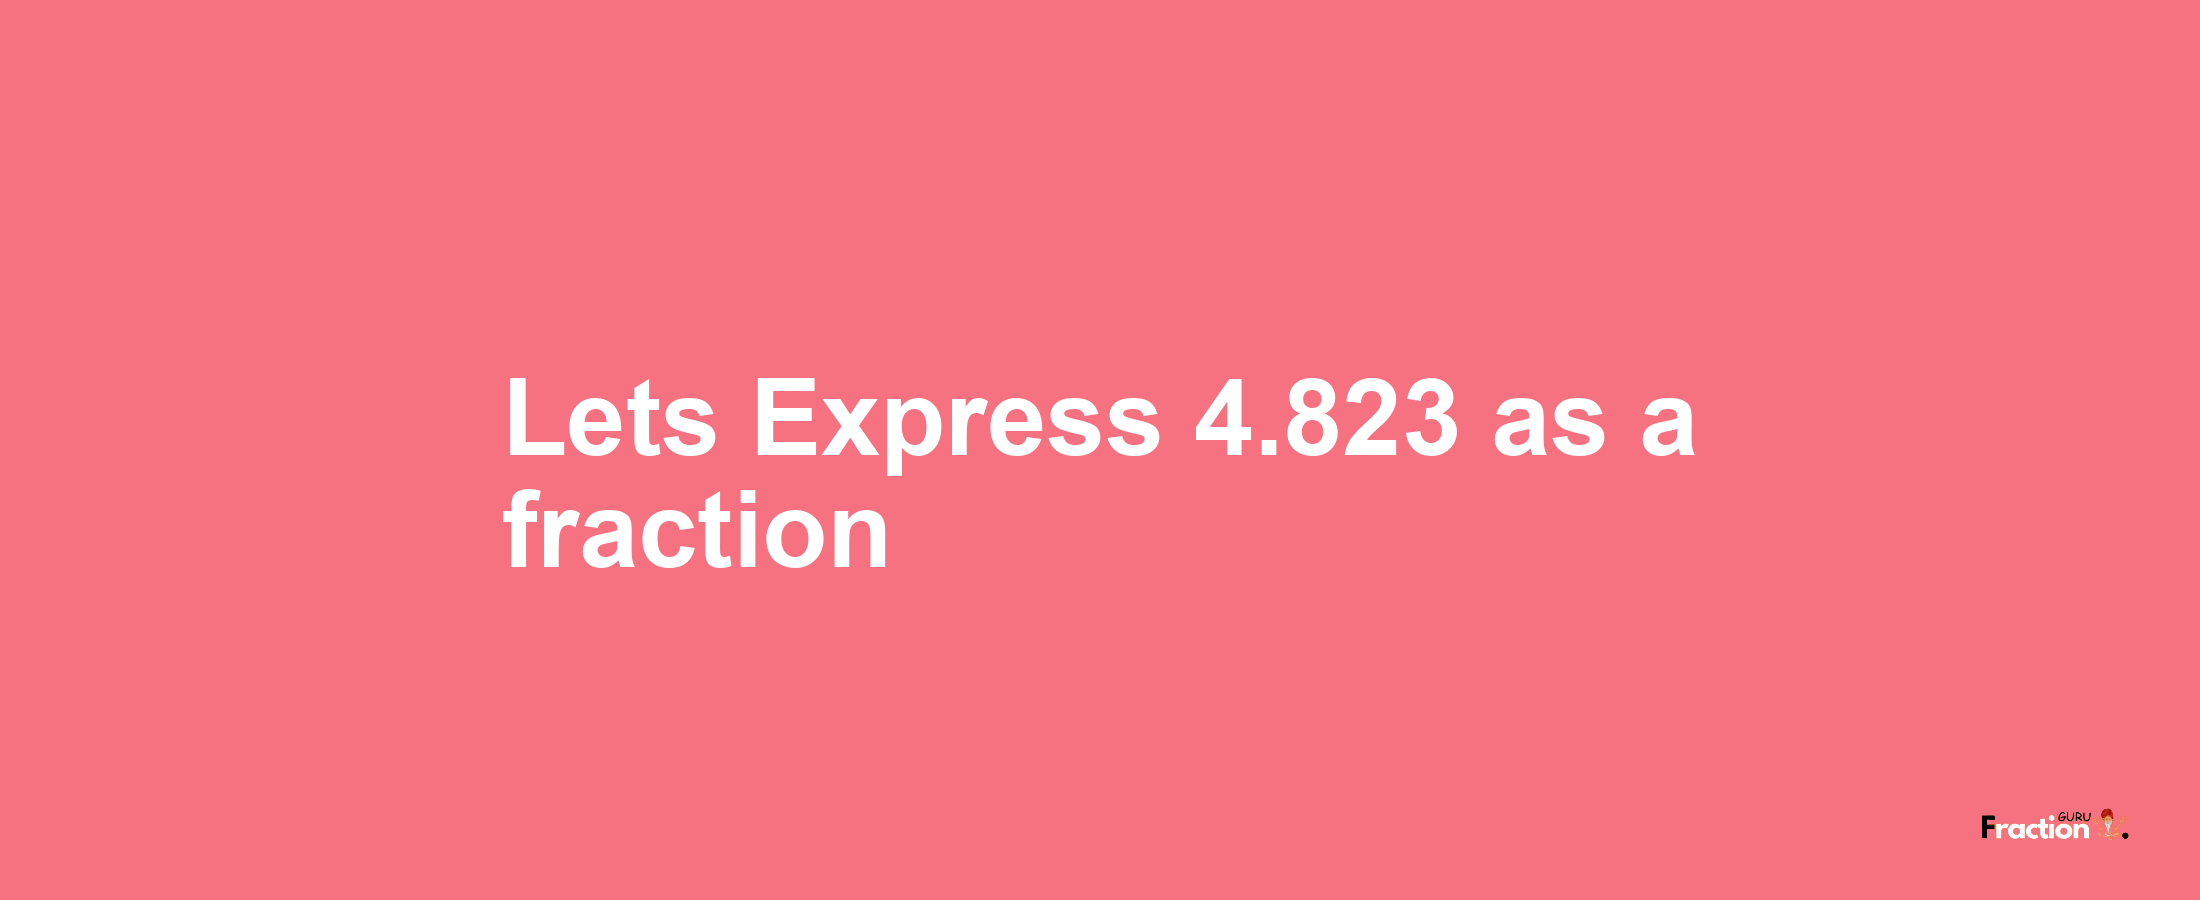 Lets Express 4.823 as afraction